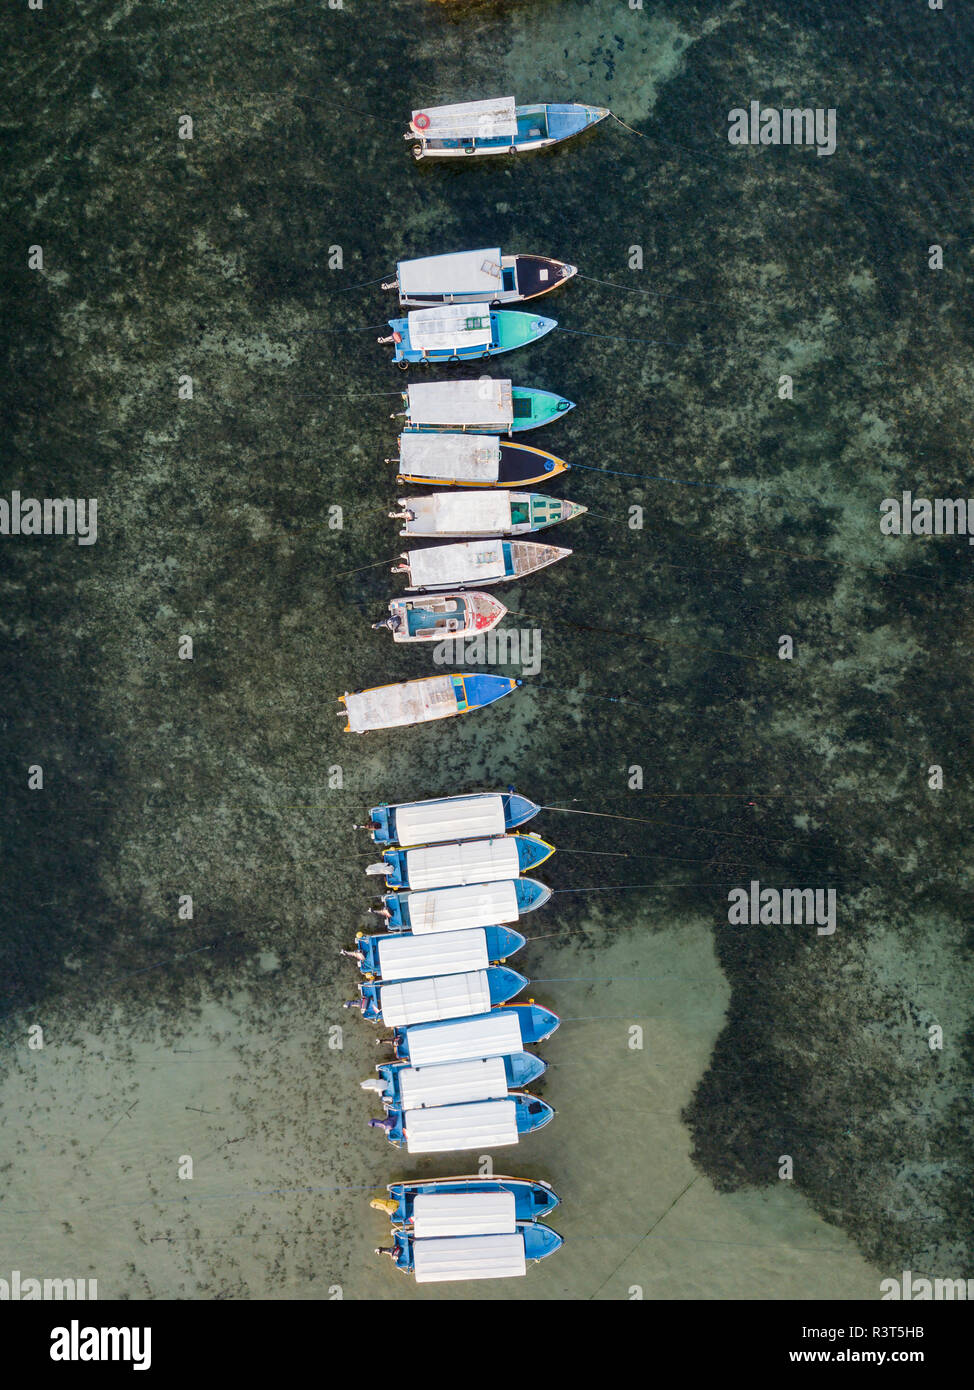 Indonesia, Bali, Benoa beach, Aerial view of moored boats in a row Stock Photo